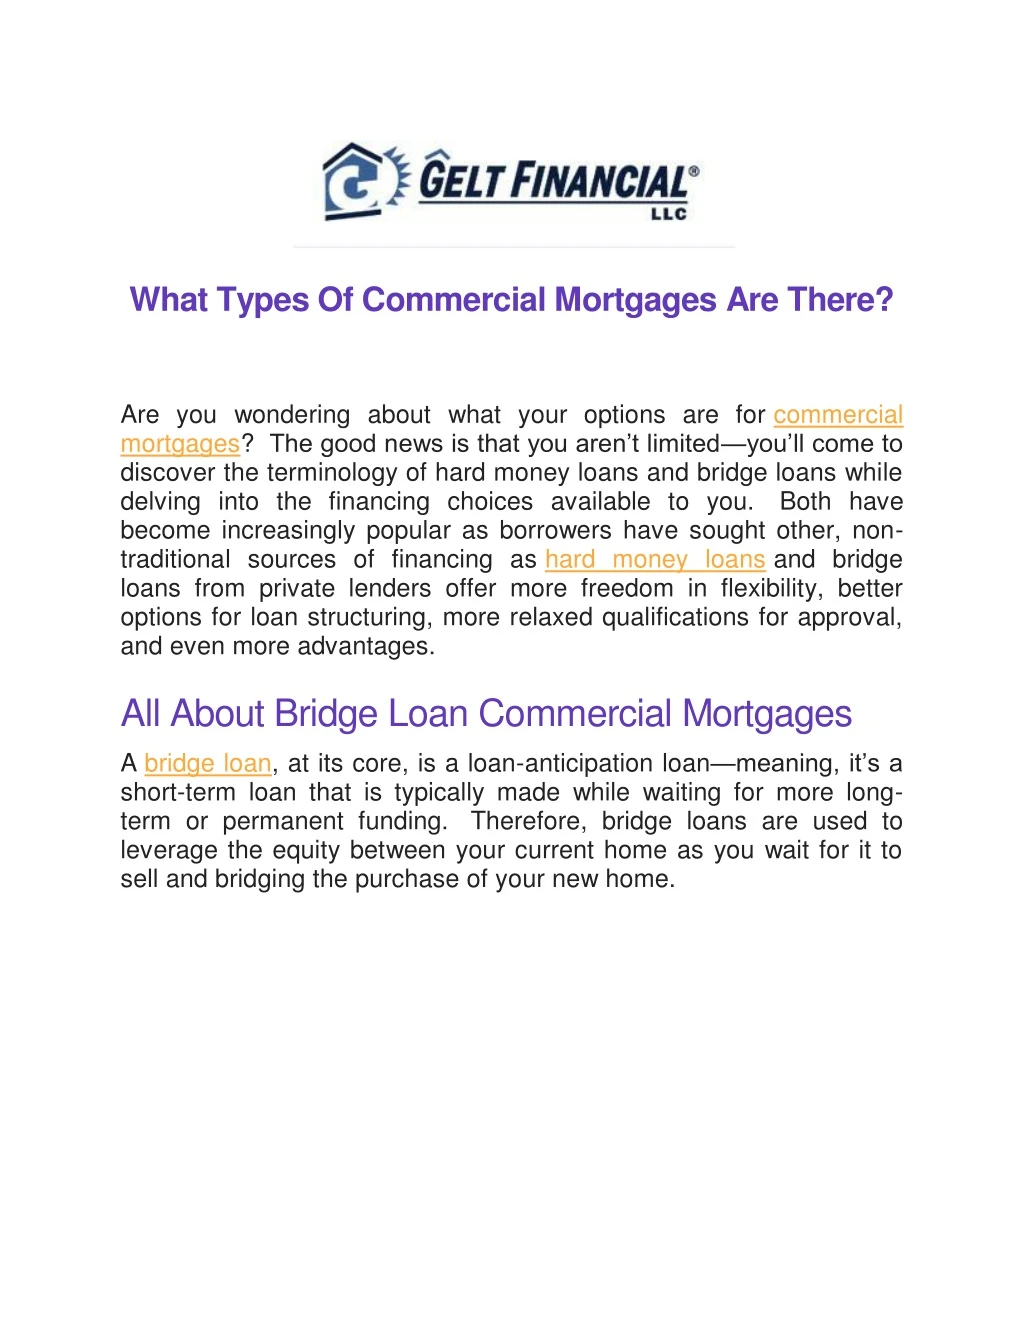 what types of commercial mortgages are there